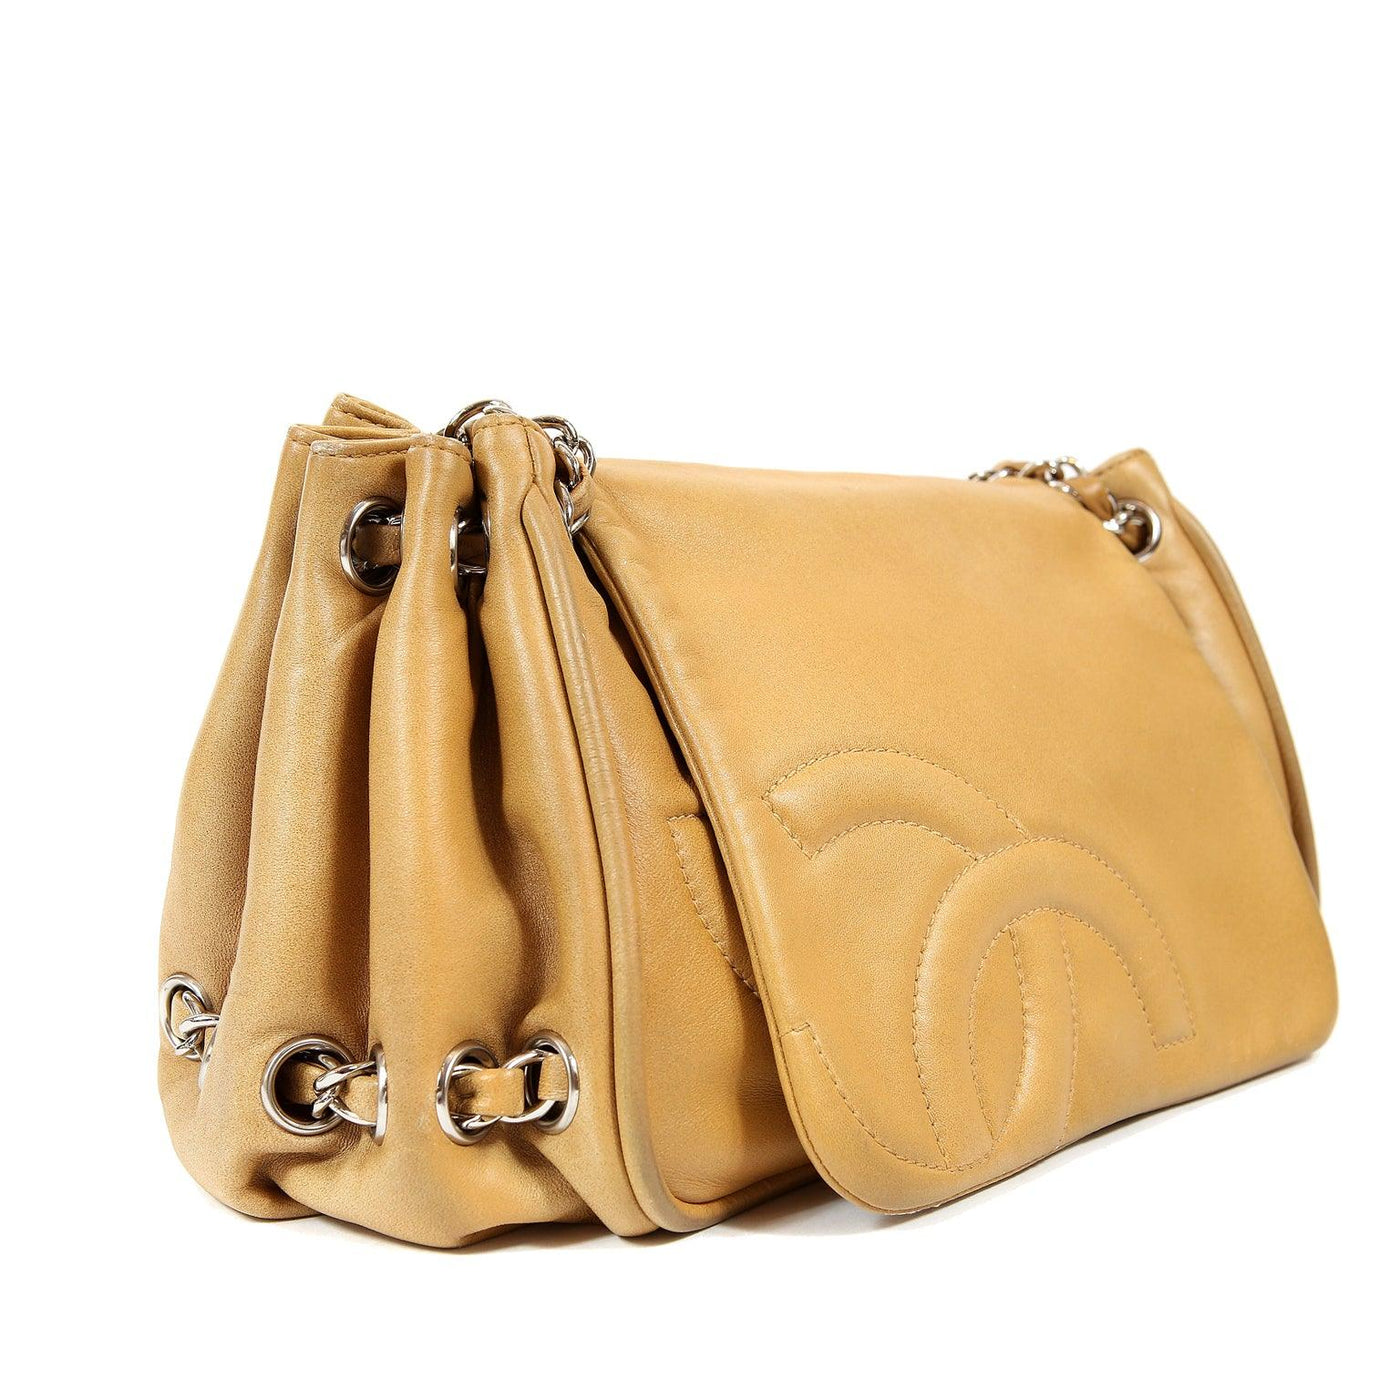 Chanel Beige Leather Accordion Flap Bag – Only Authentics